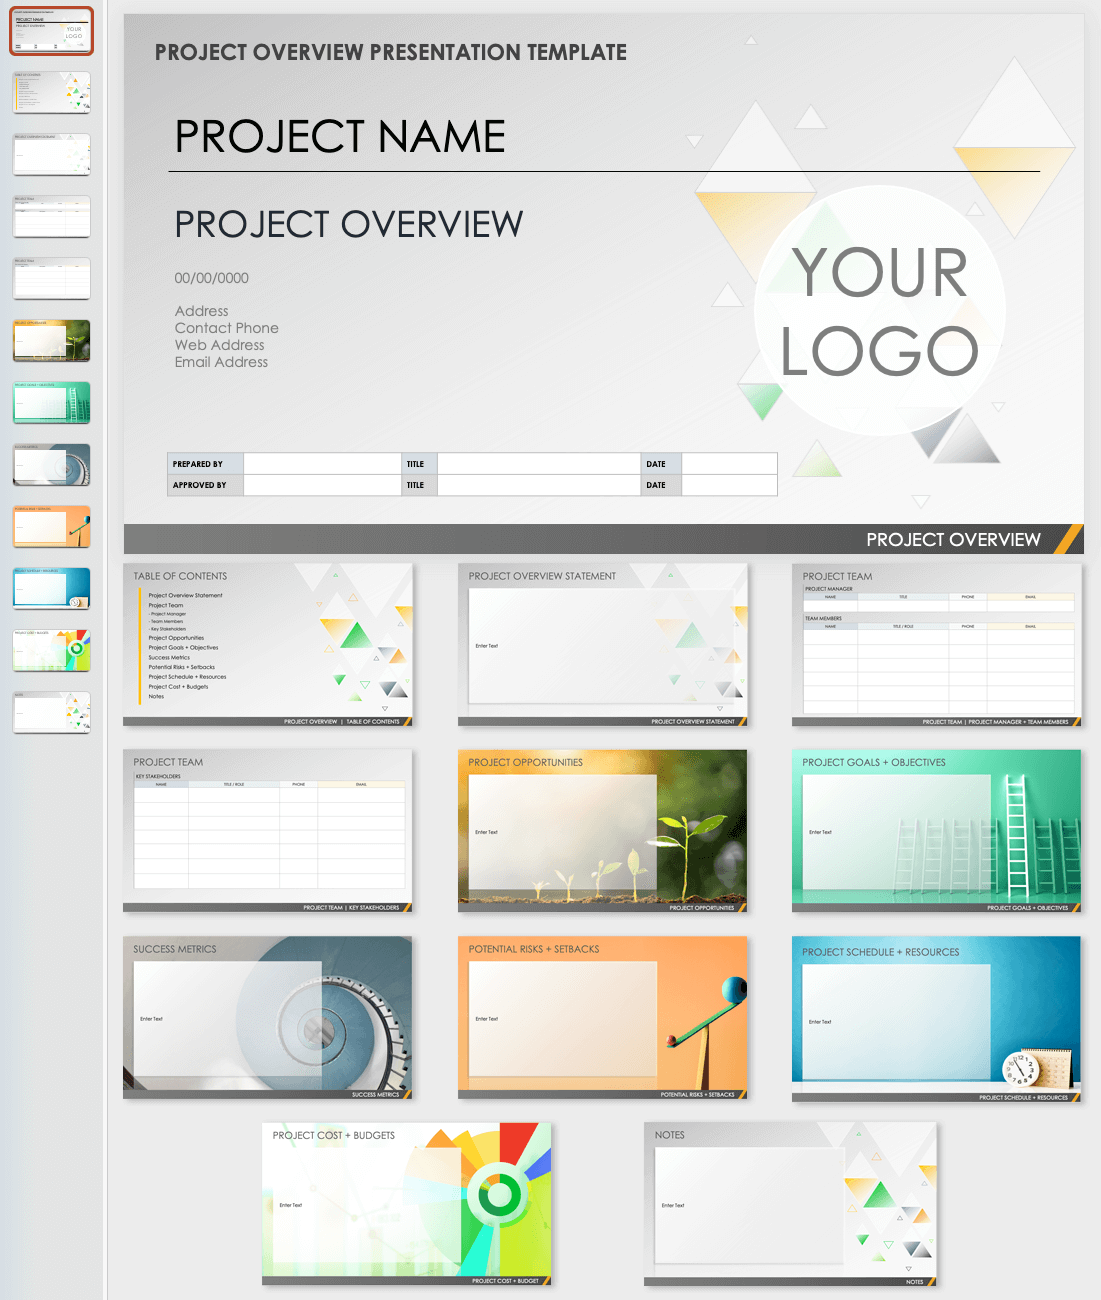 Project Overview Presentation Template